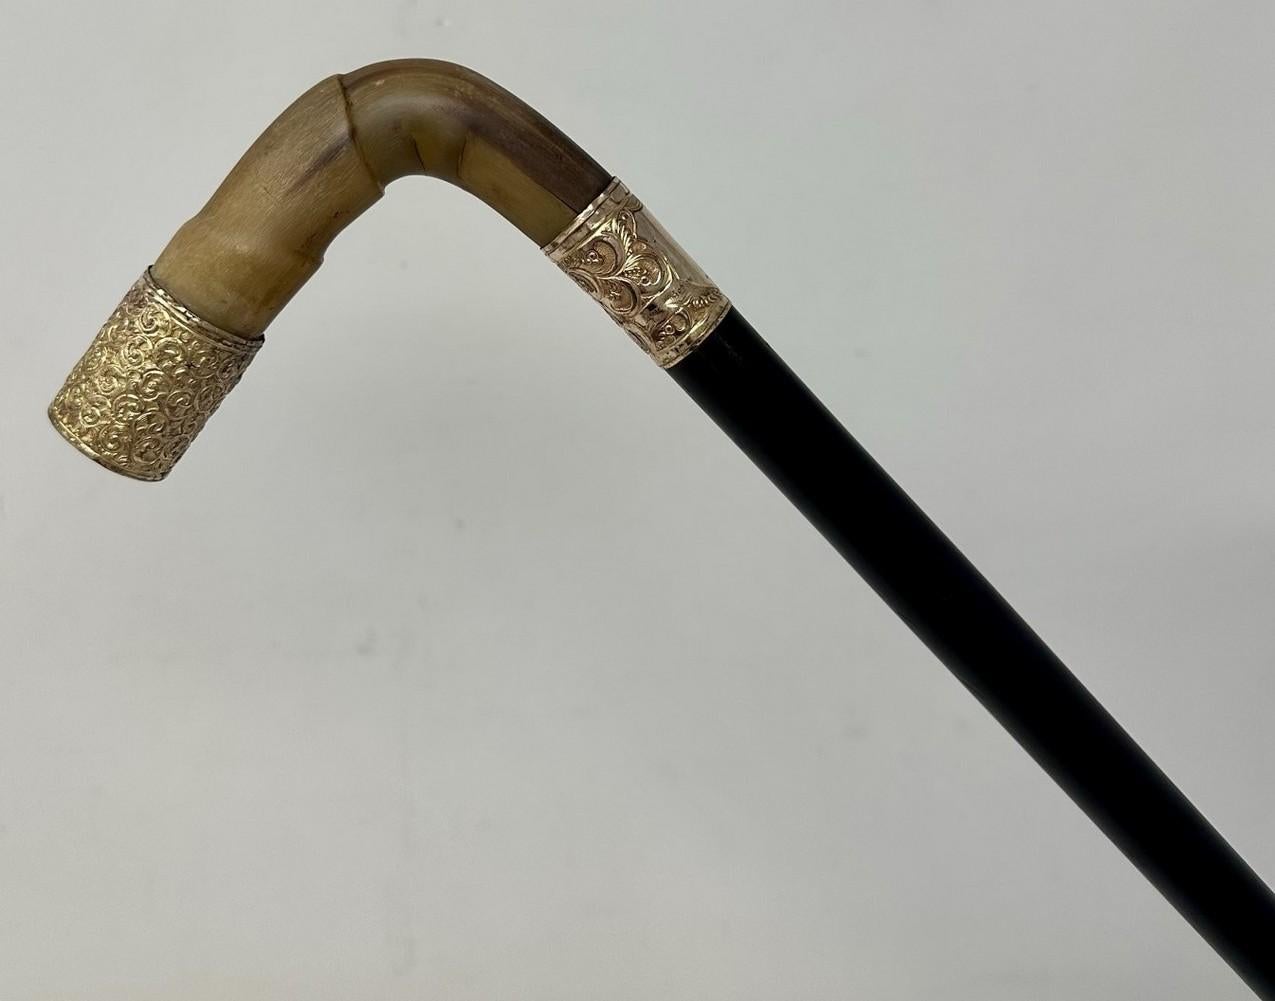 Very Stylish Fine Quality Polished Ebony Wooden Lady’s or Gentleman’s Walking Cane of substantial quality and good weight very suitable to use as an everyday stick, with an elegant decoratively carved classical Cow Horn L shaped handle above a